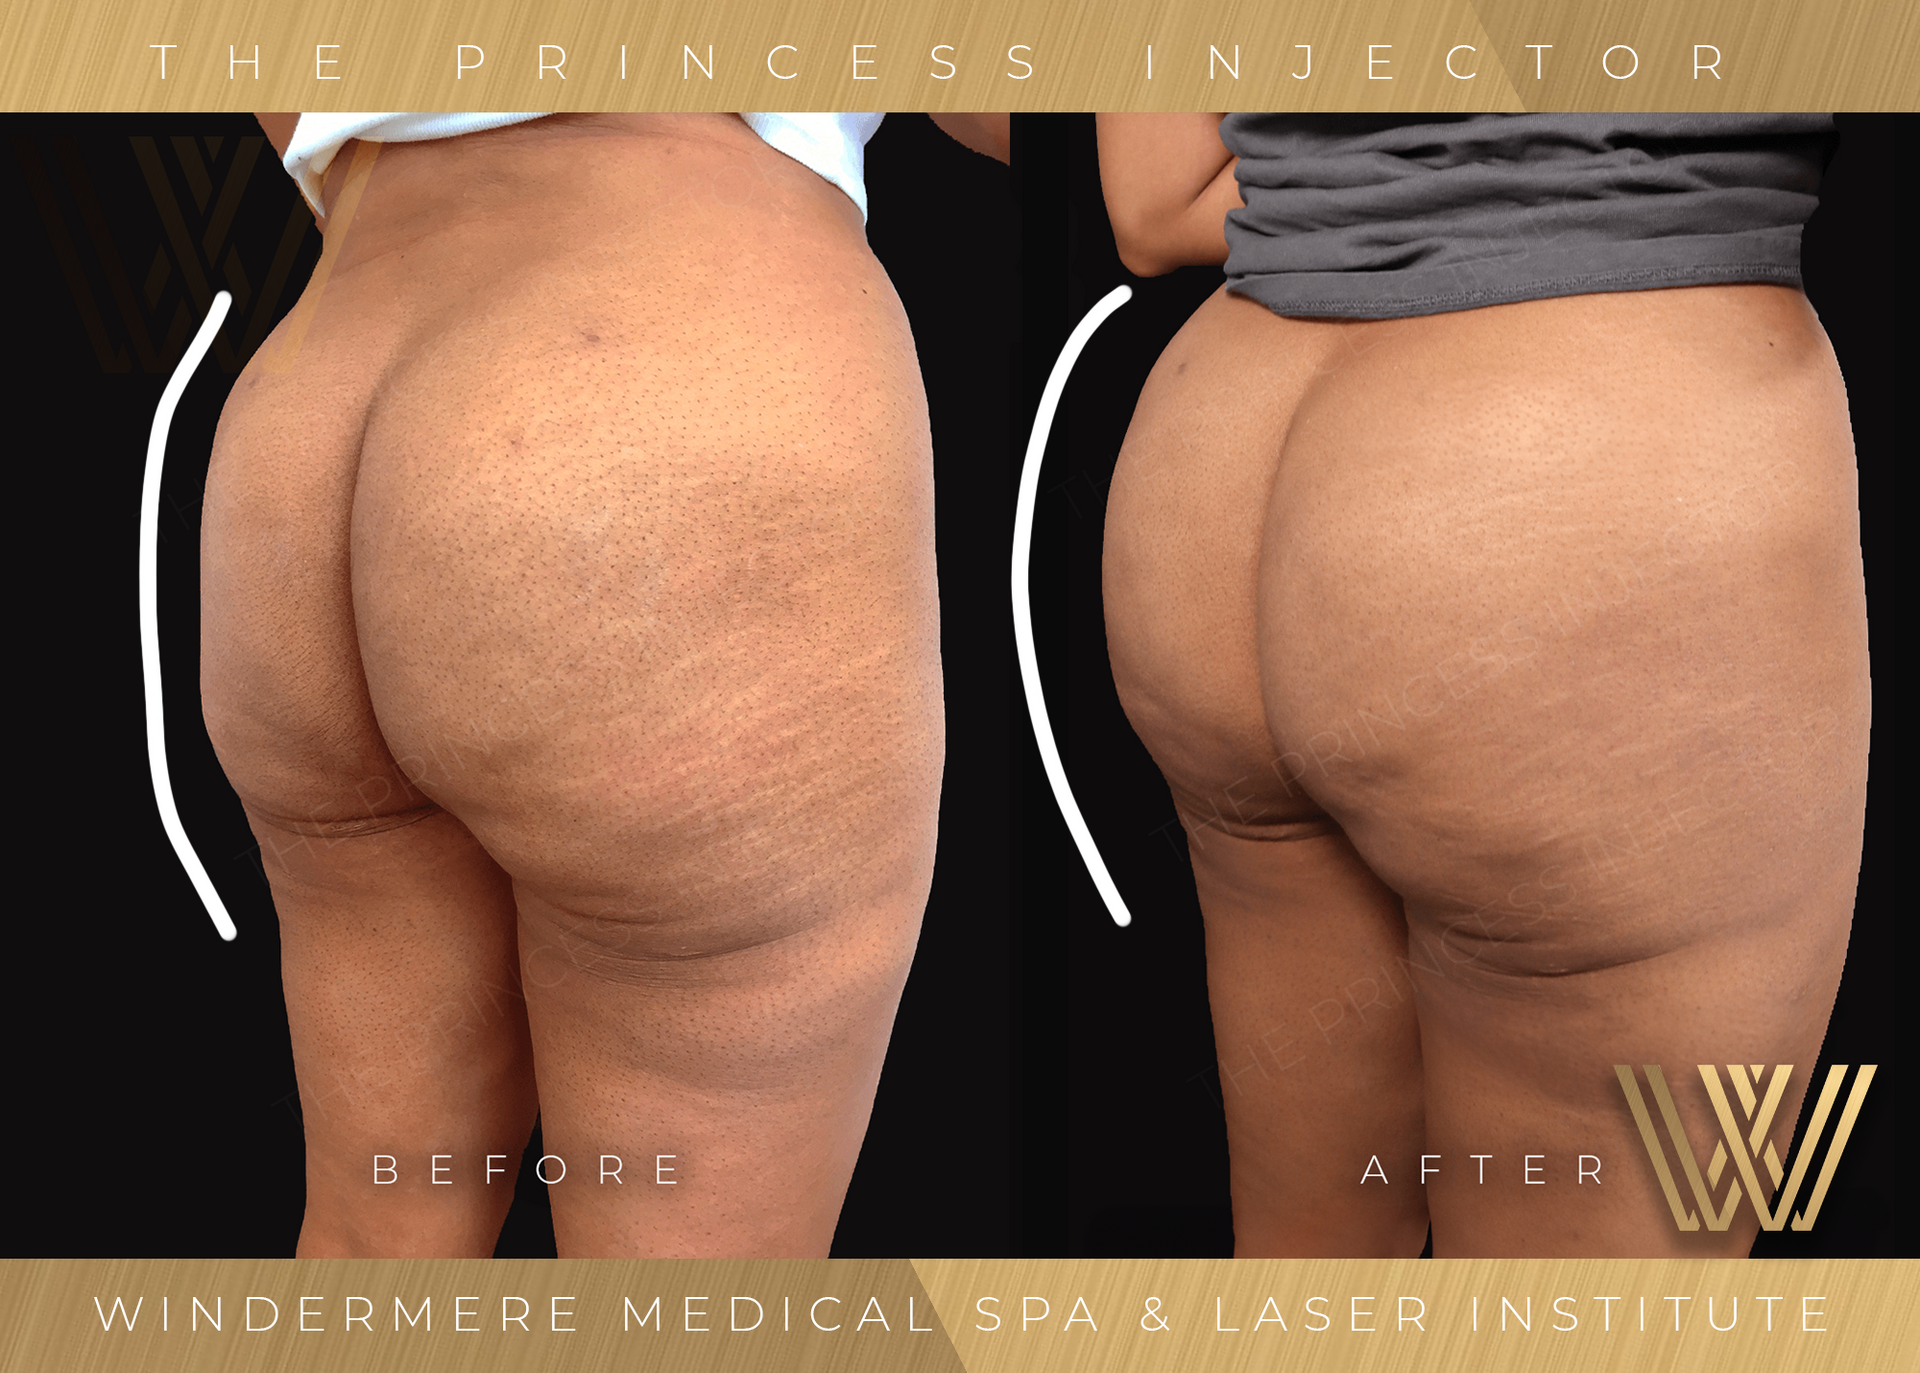 Before and after image showcasing the transformative results of a Sculptra Butt Lift treatment at Windermere Medical Spa & Laser Institute, displaying enhanced contours, lift, and improved skin texture.